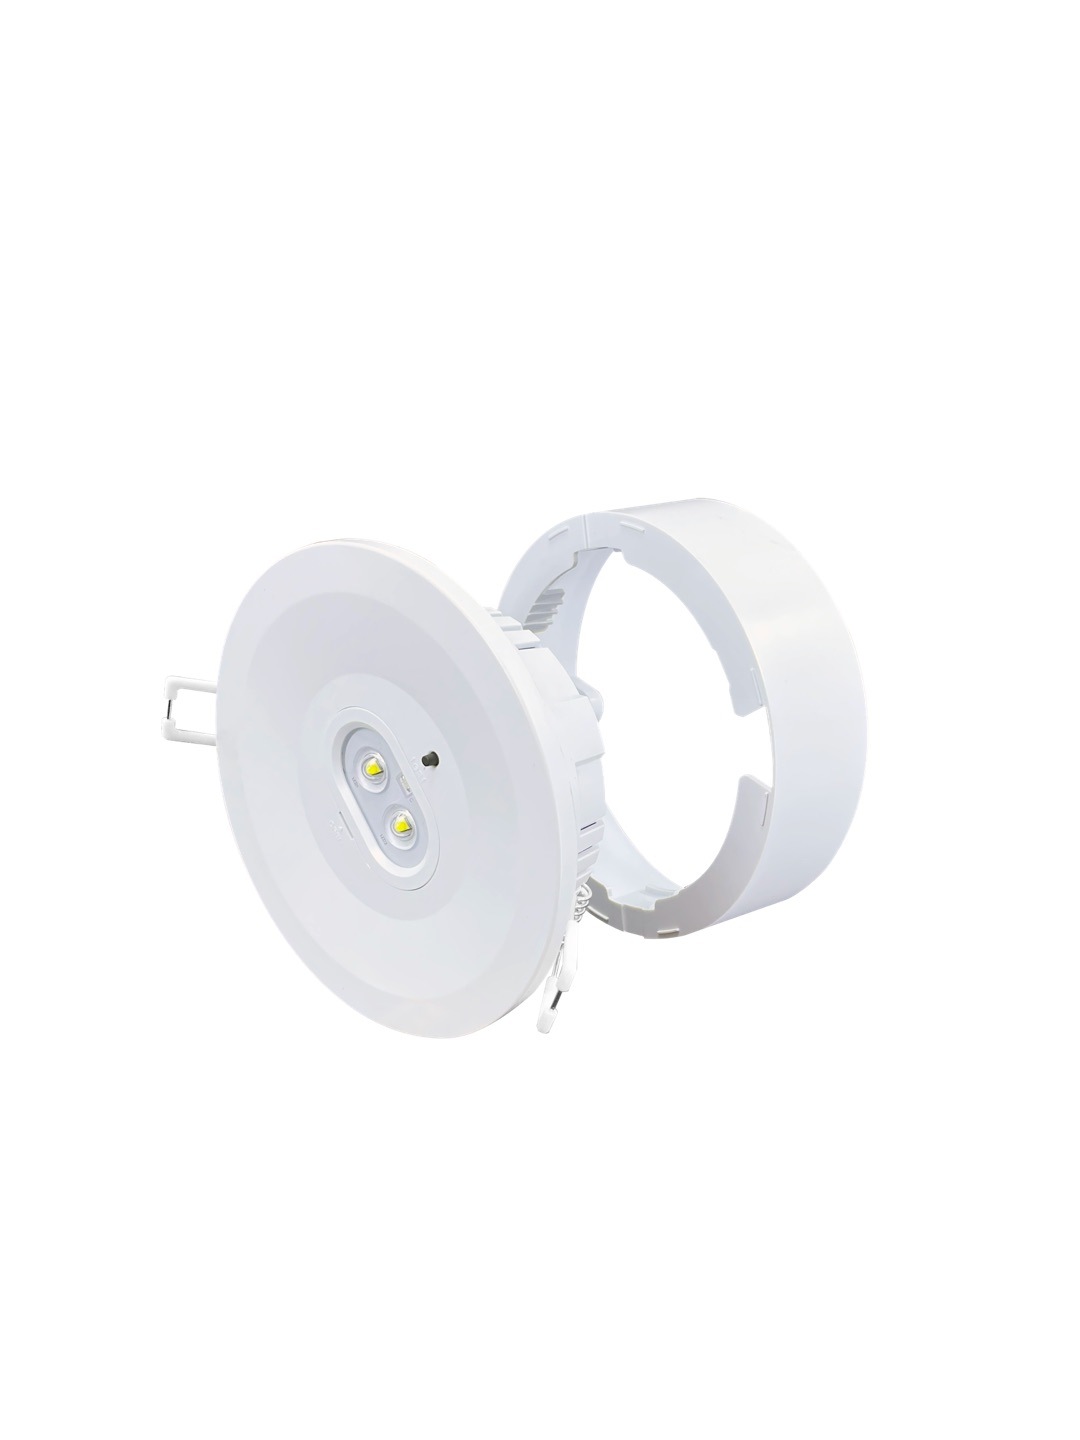 Rechargeable Emergency Downlight Surface or Recessed Installation